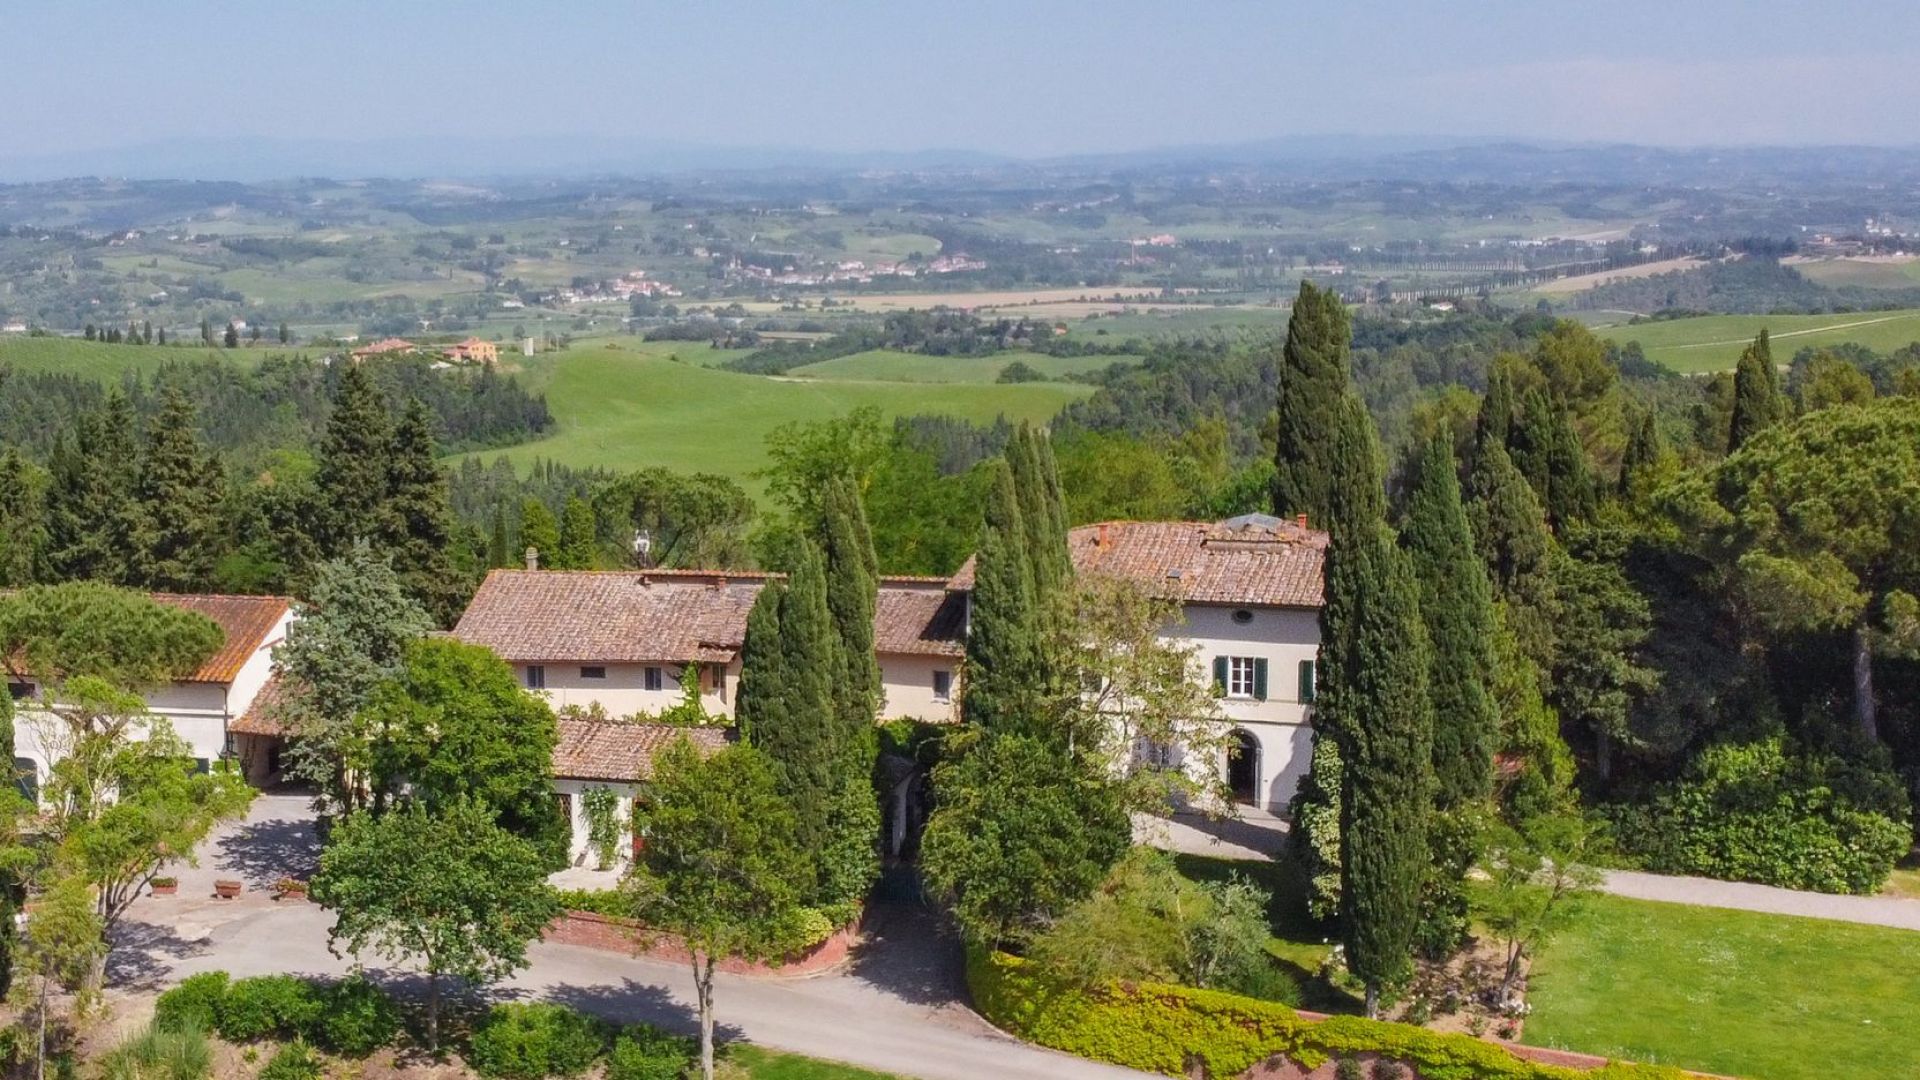 For sale apartment in  San Miniato Toscana